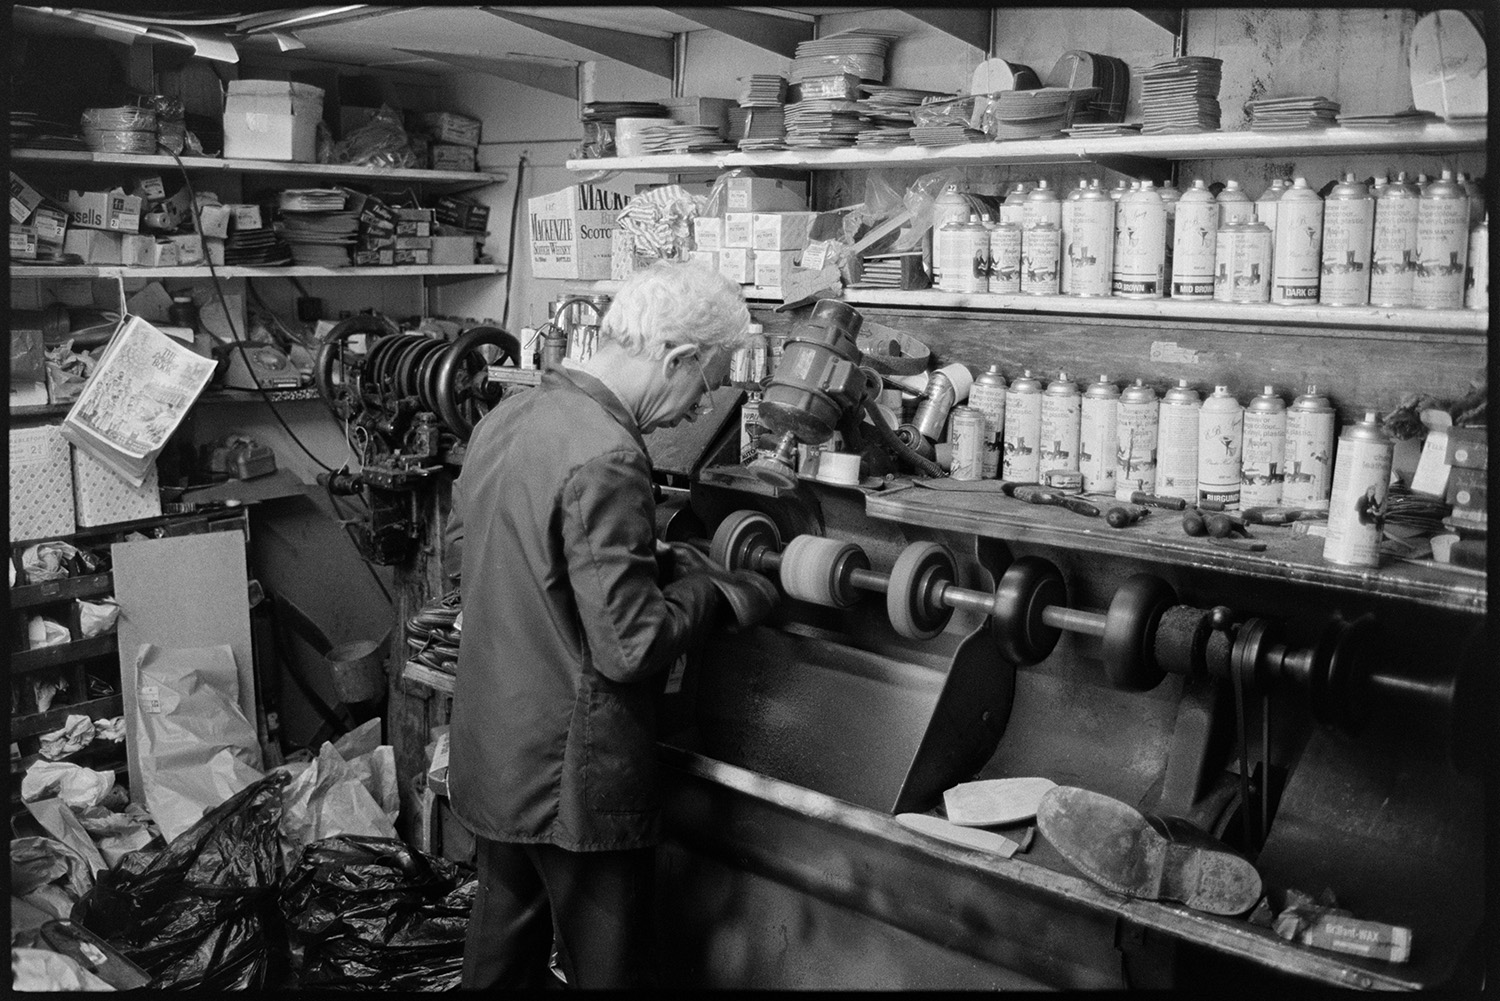 Man and woman shoemakers working in shoe repair shop. 
[Ray Gale working on the sole of a shoe in his shoe repair shop in Boutport Street, Barnstaple. A spindle with various wheels is turning in front of him and aerosol cans are on the shelves in the background.]